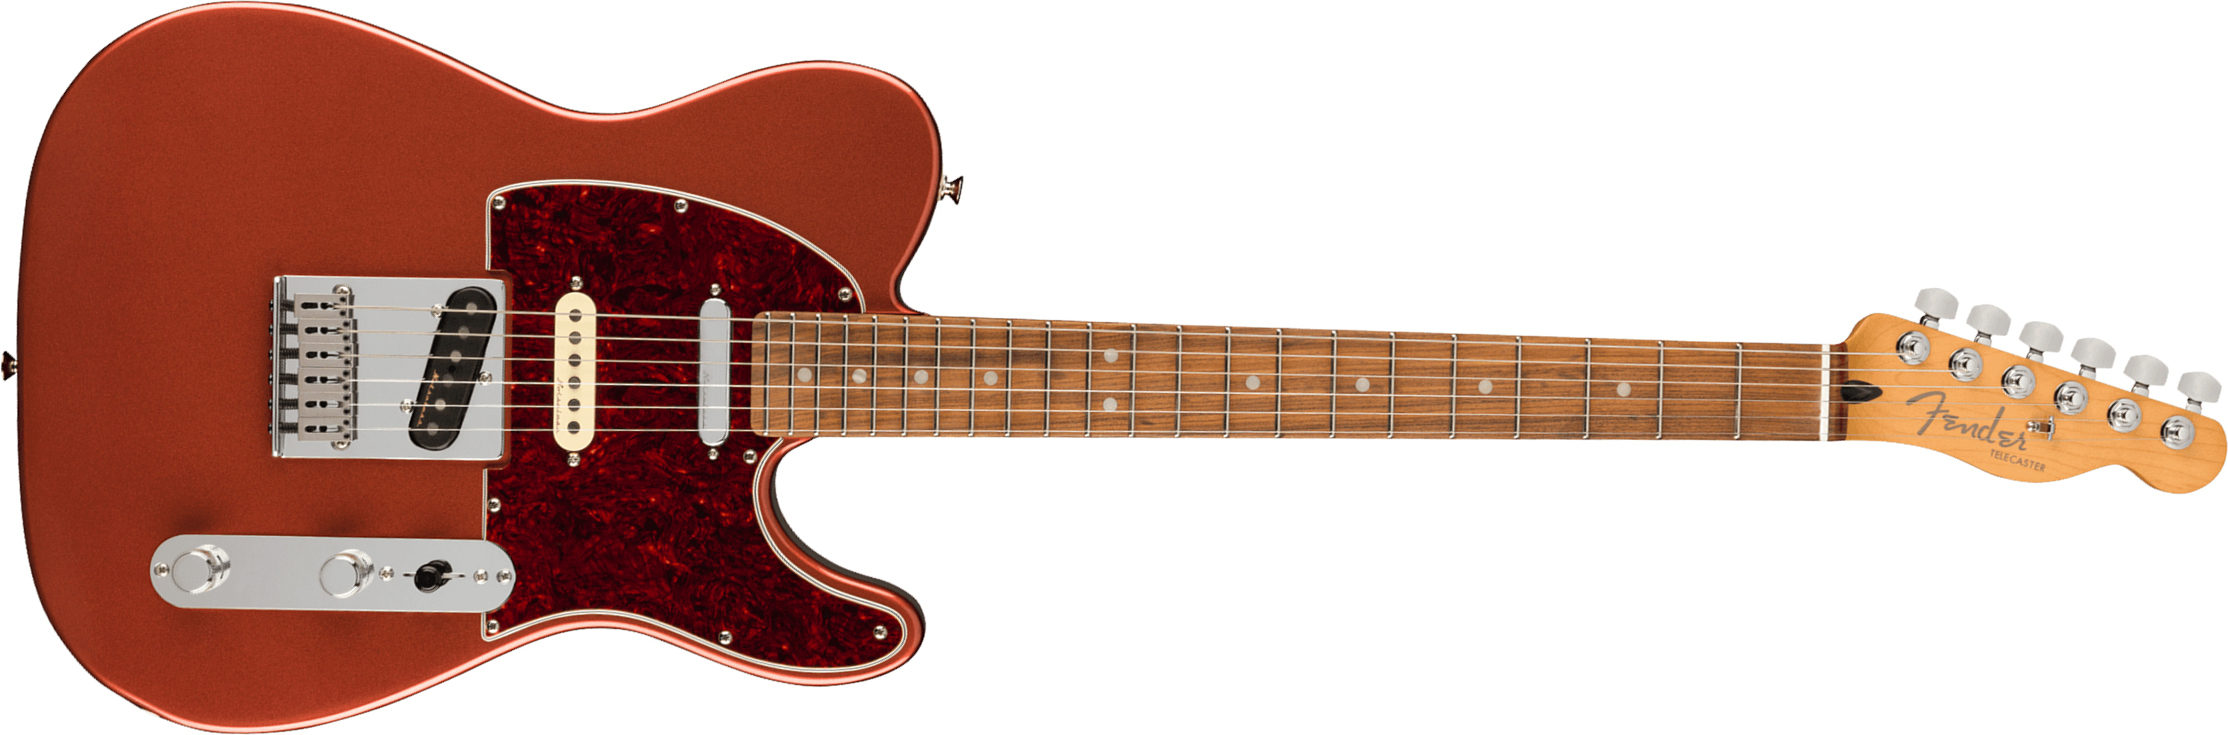 Fender Tele Player Plus Nashville Mex 3s Ht Pf - Aged Candy Apple Red - Tel shape electric guitar - Main picture